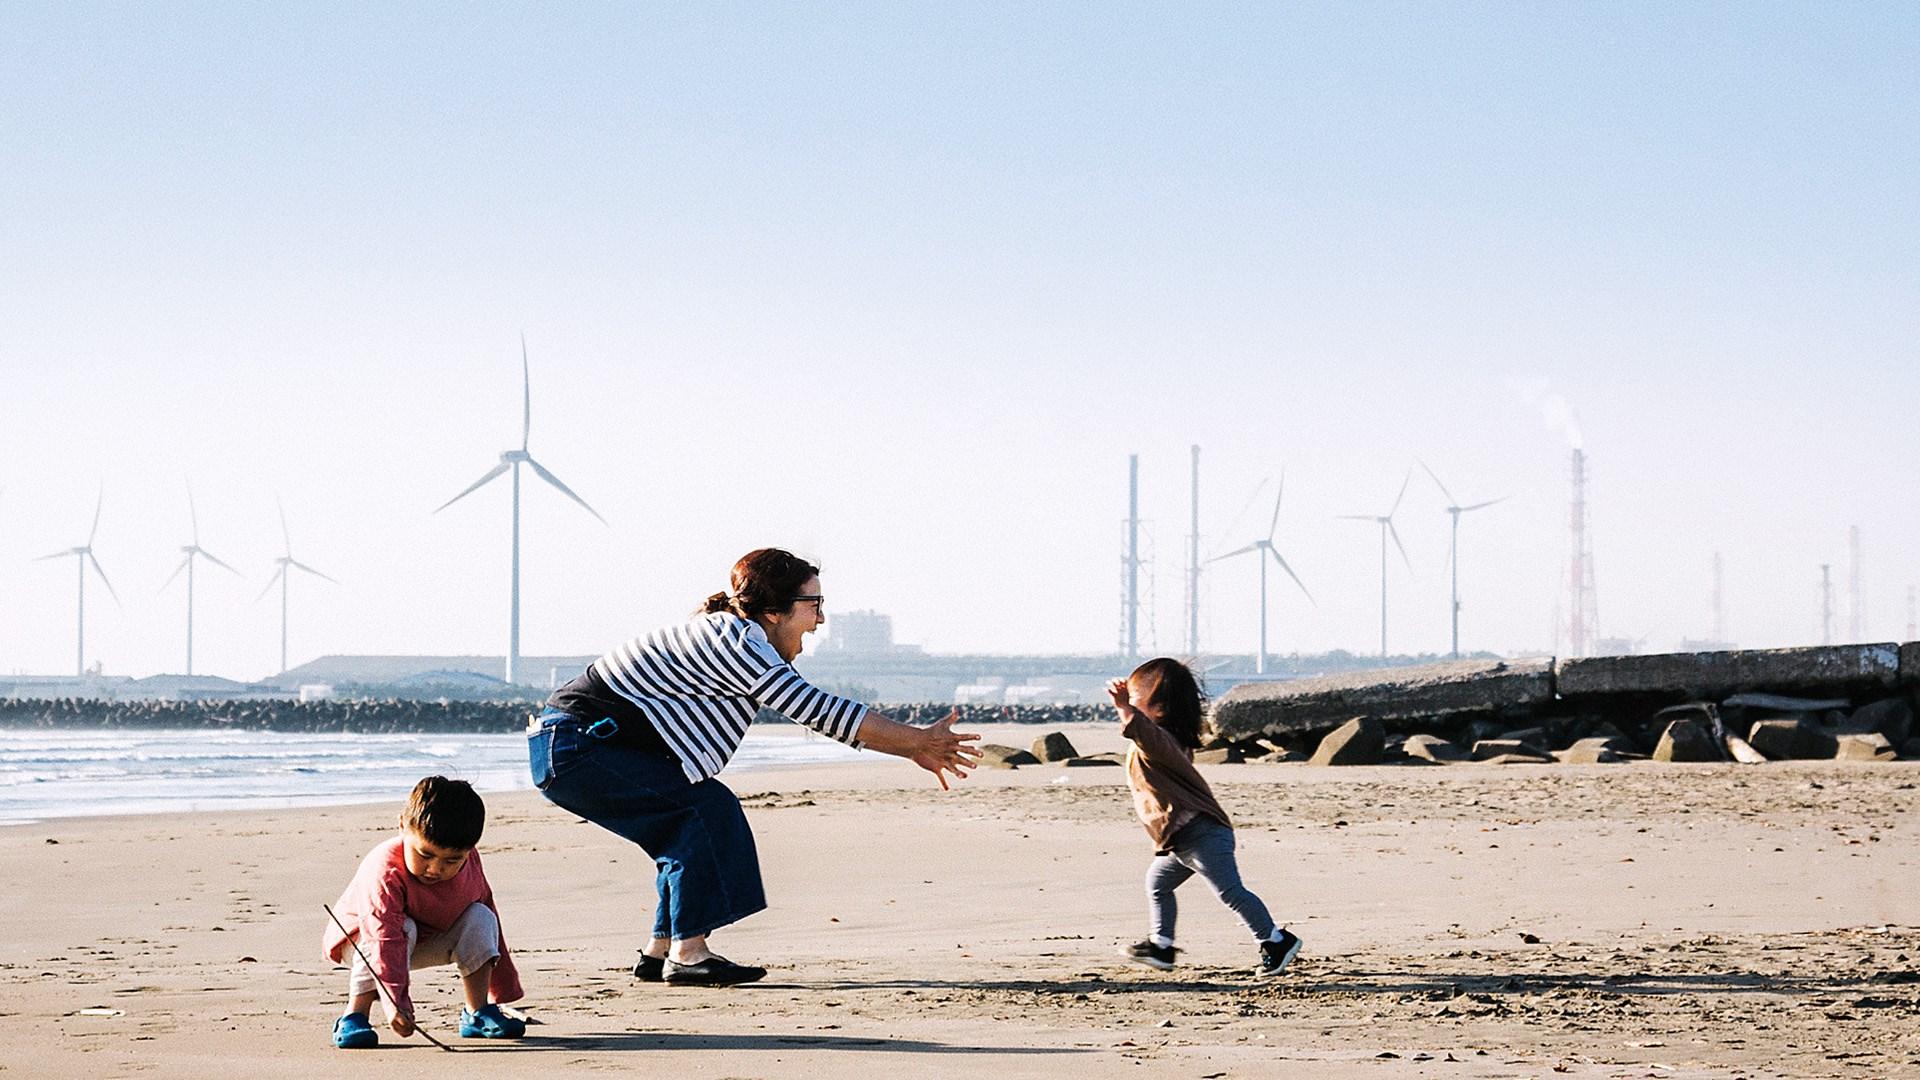 Family relaxed on the beach close to wind farm.